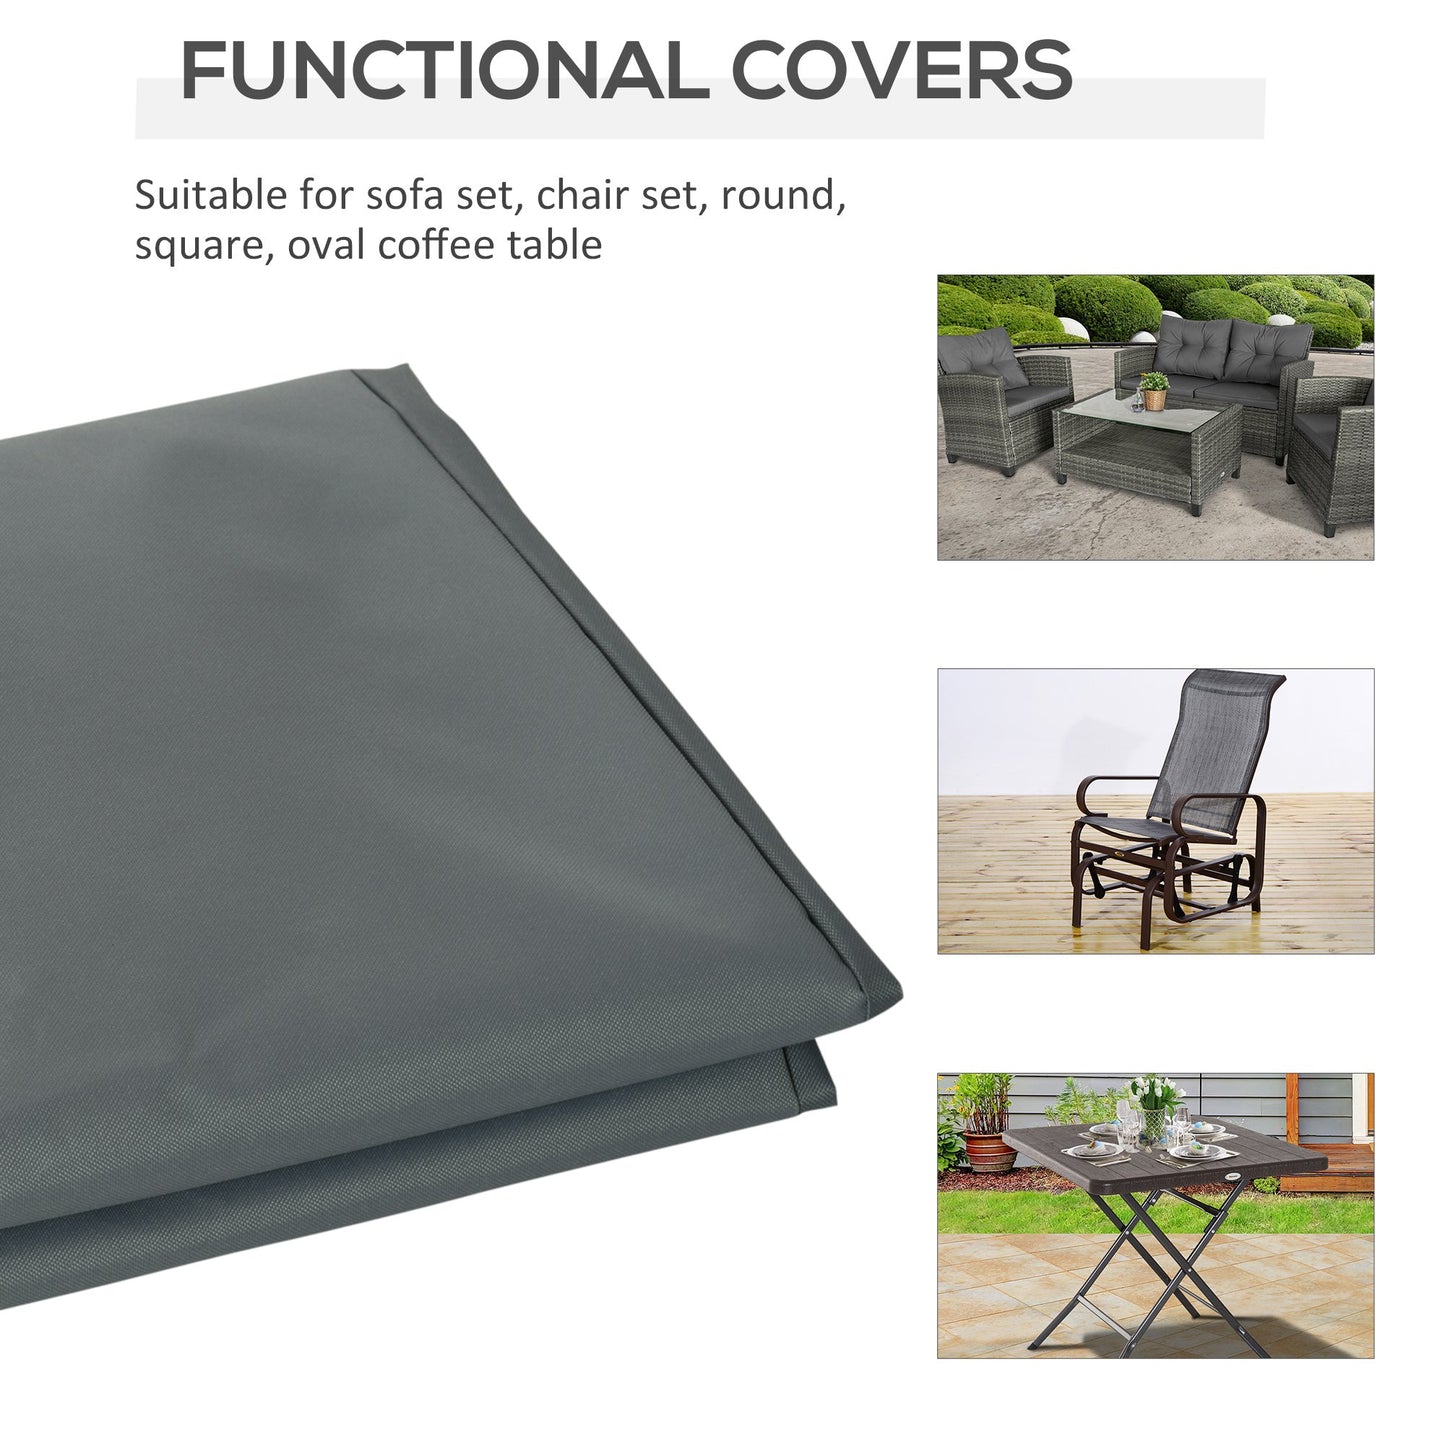 Outsunny 127x72cm Outdoor Garden Rattan Furniture Protective Cover Water UV Resistant